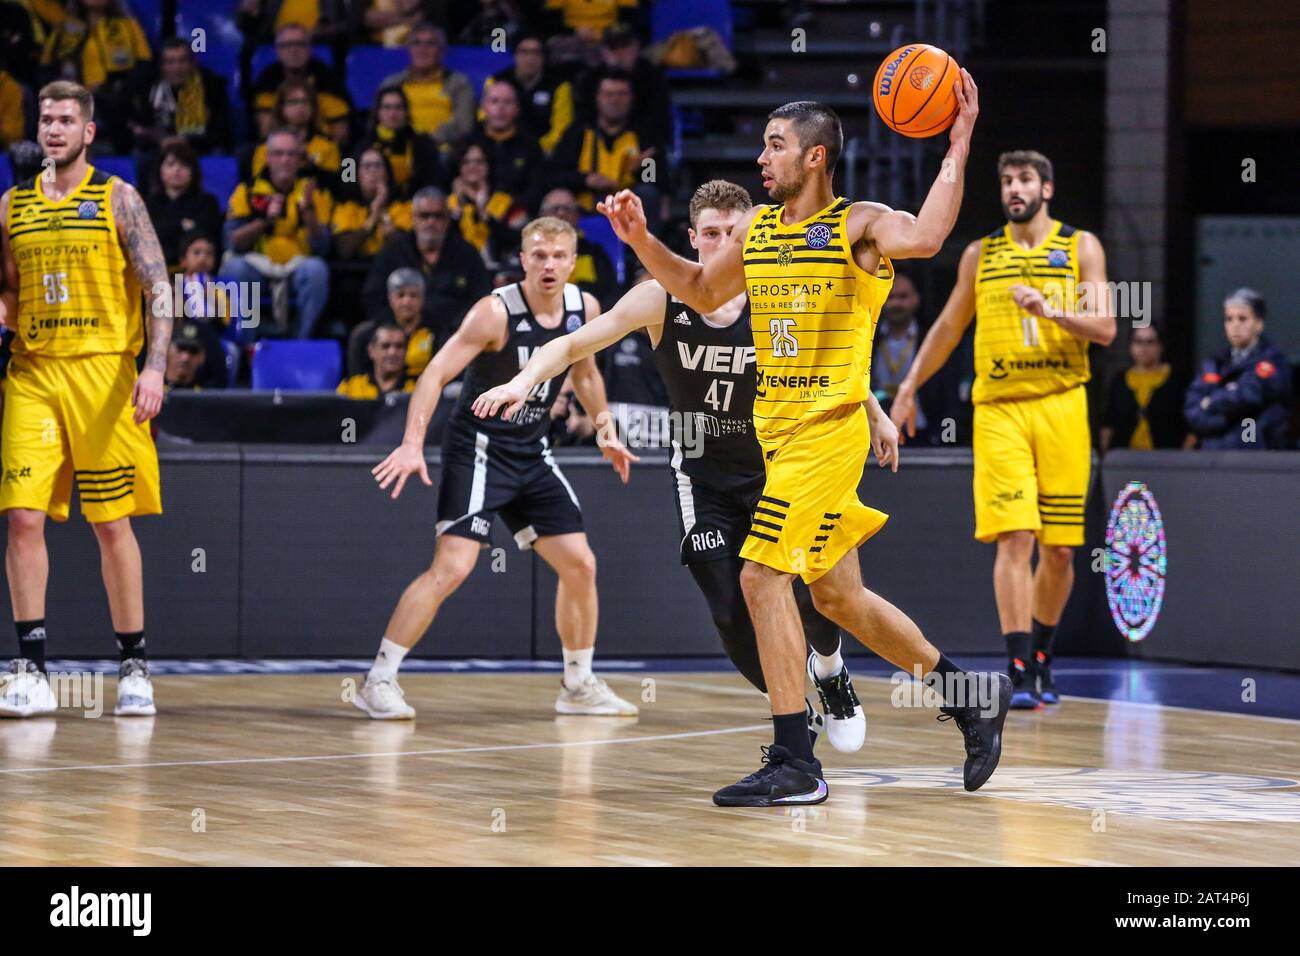 alex lopez (iberostar tenerife) in action during Iberostar Tenerife vs Vef  Riga, Tenerife, Italy, 28 Jan 2020, Basketball Basketball Champions League  Stock Photo - Alamy